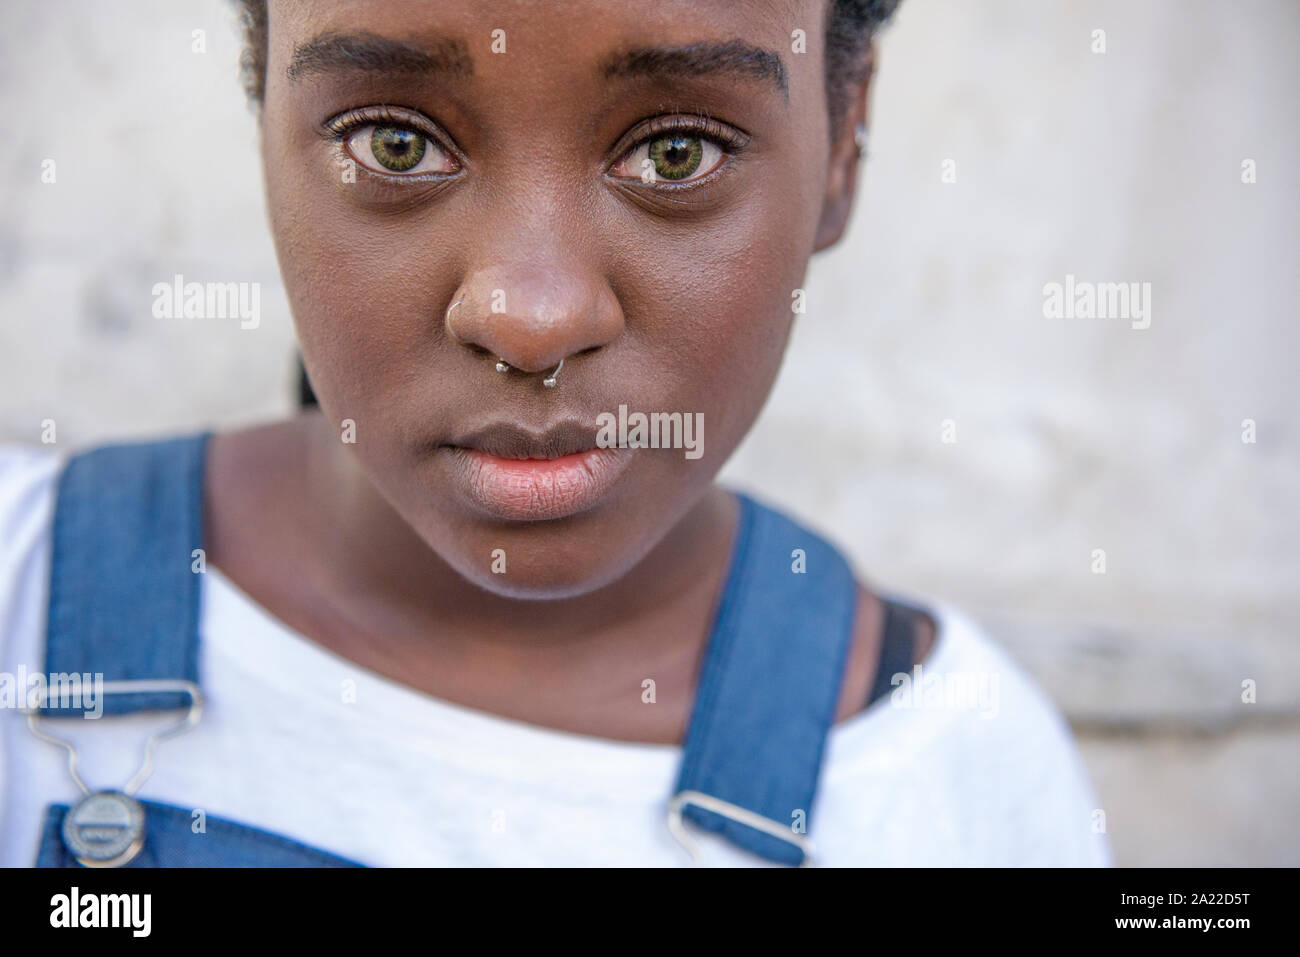 Afro-Brazilian girl with green eyes wearing jumpsuit Stock Photo